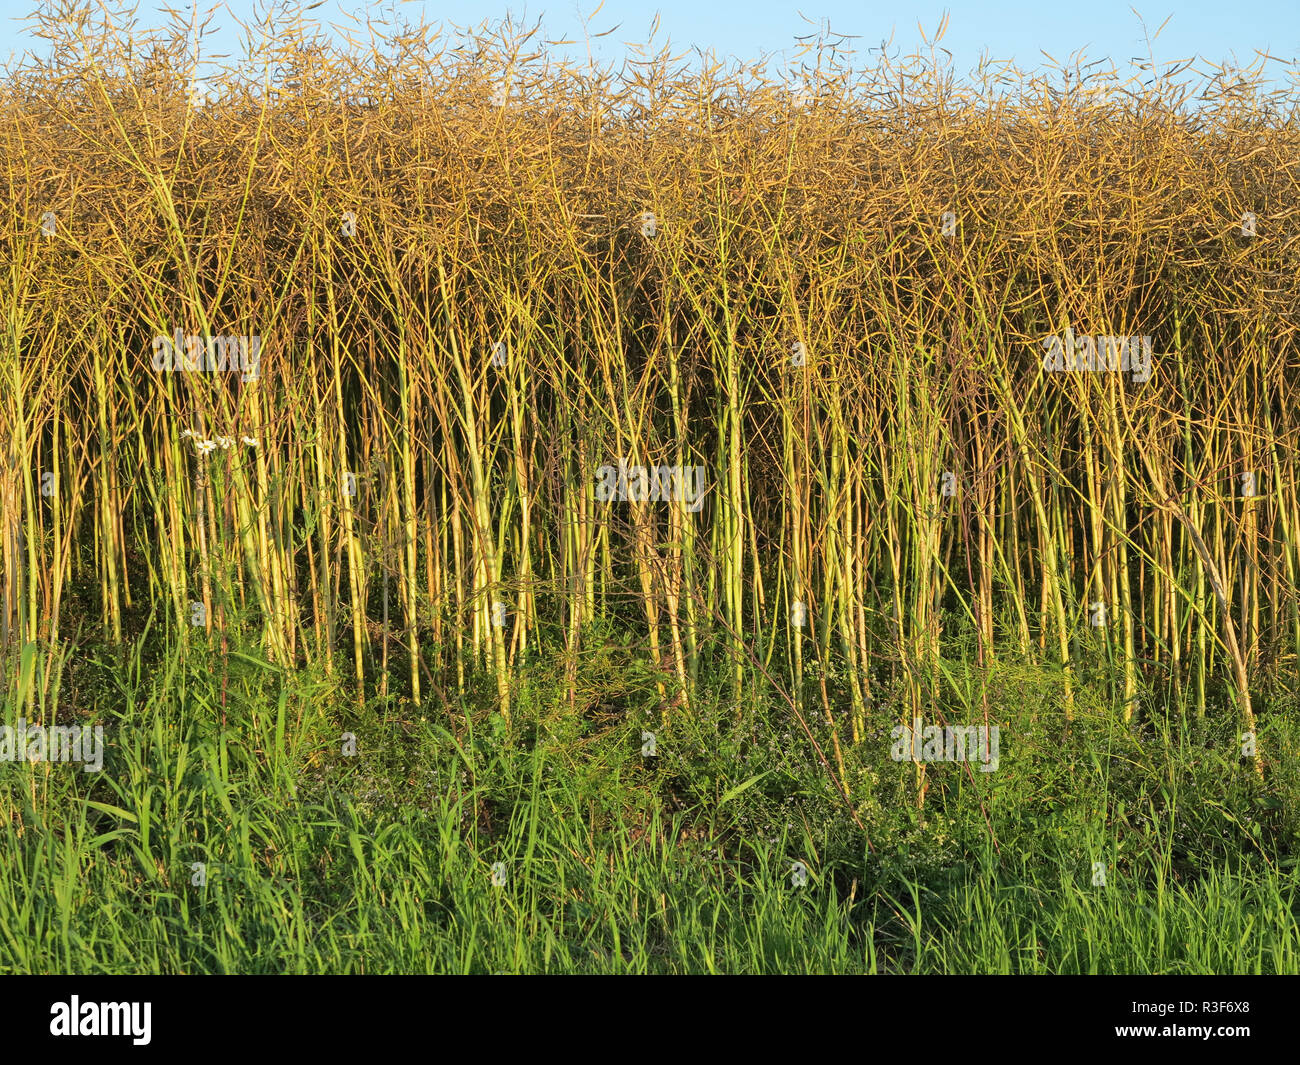 japanese knotweed in autumn Stock Photo